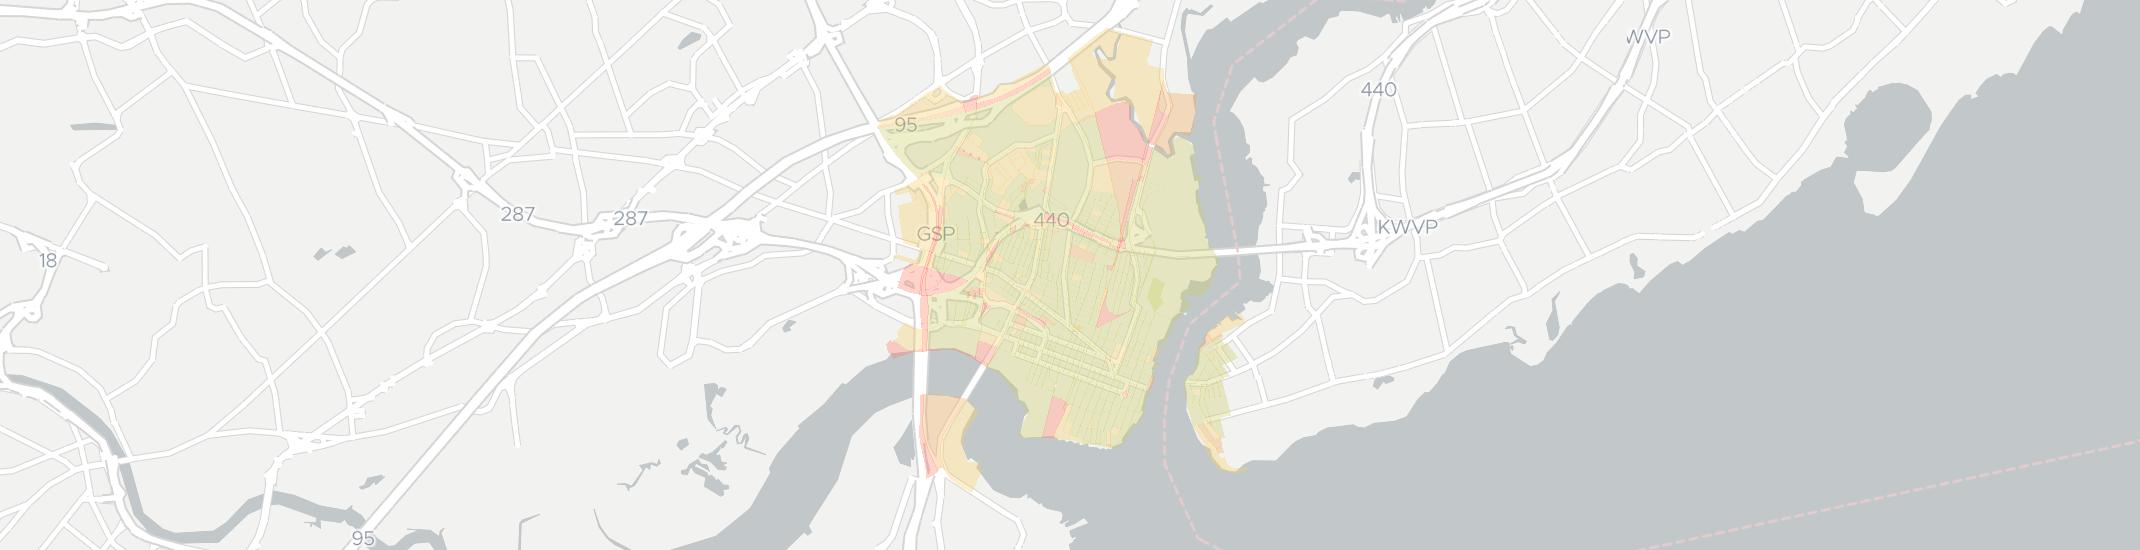 Perth Amboy Internet Competition Map. Click for interactive map.